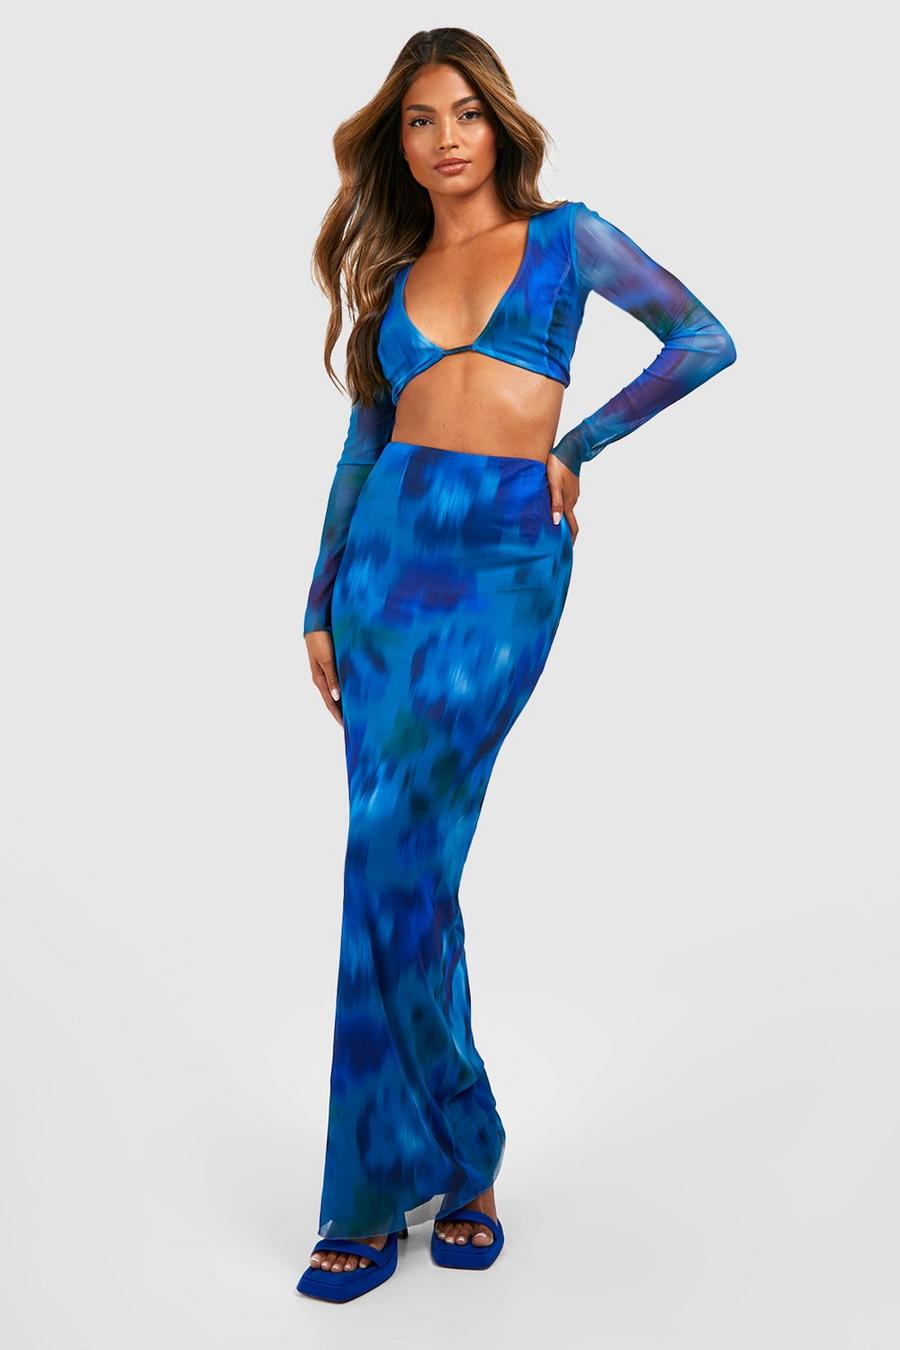 Pacific blue Blurred Floral Mesh Bralette & Maxi Skirt